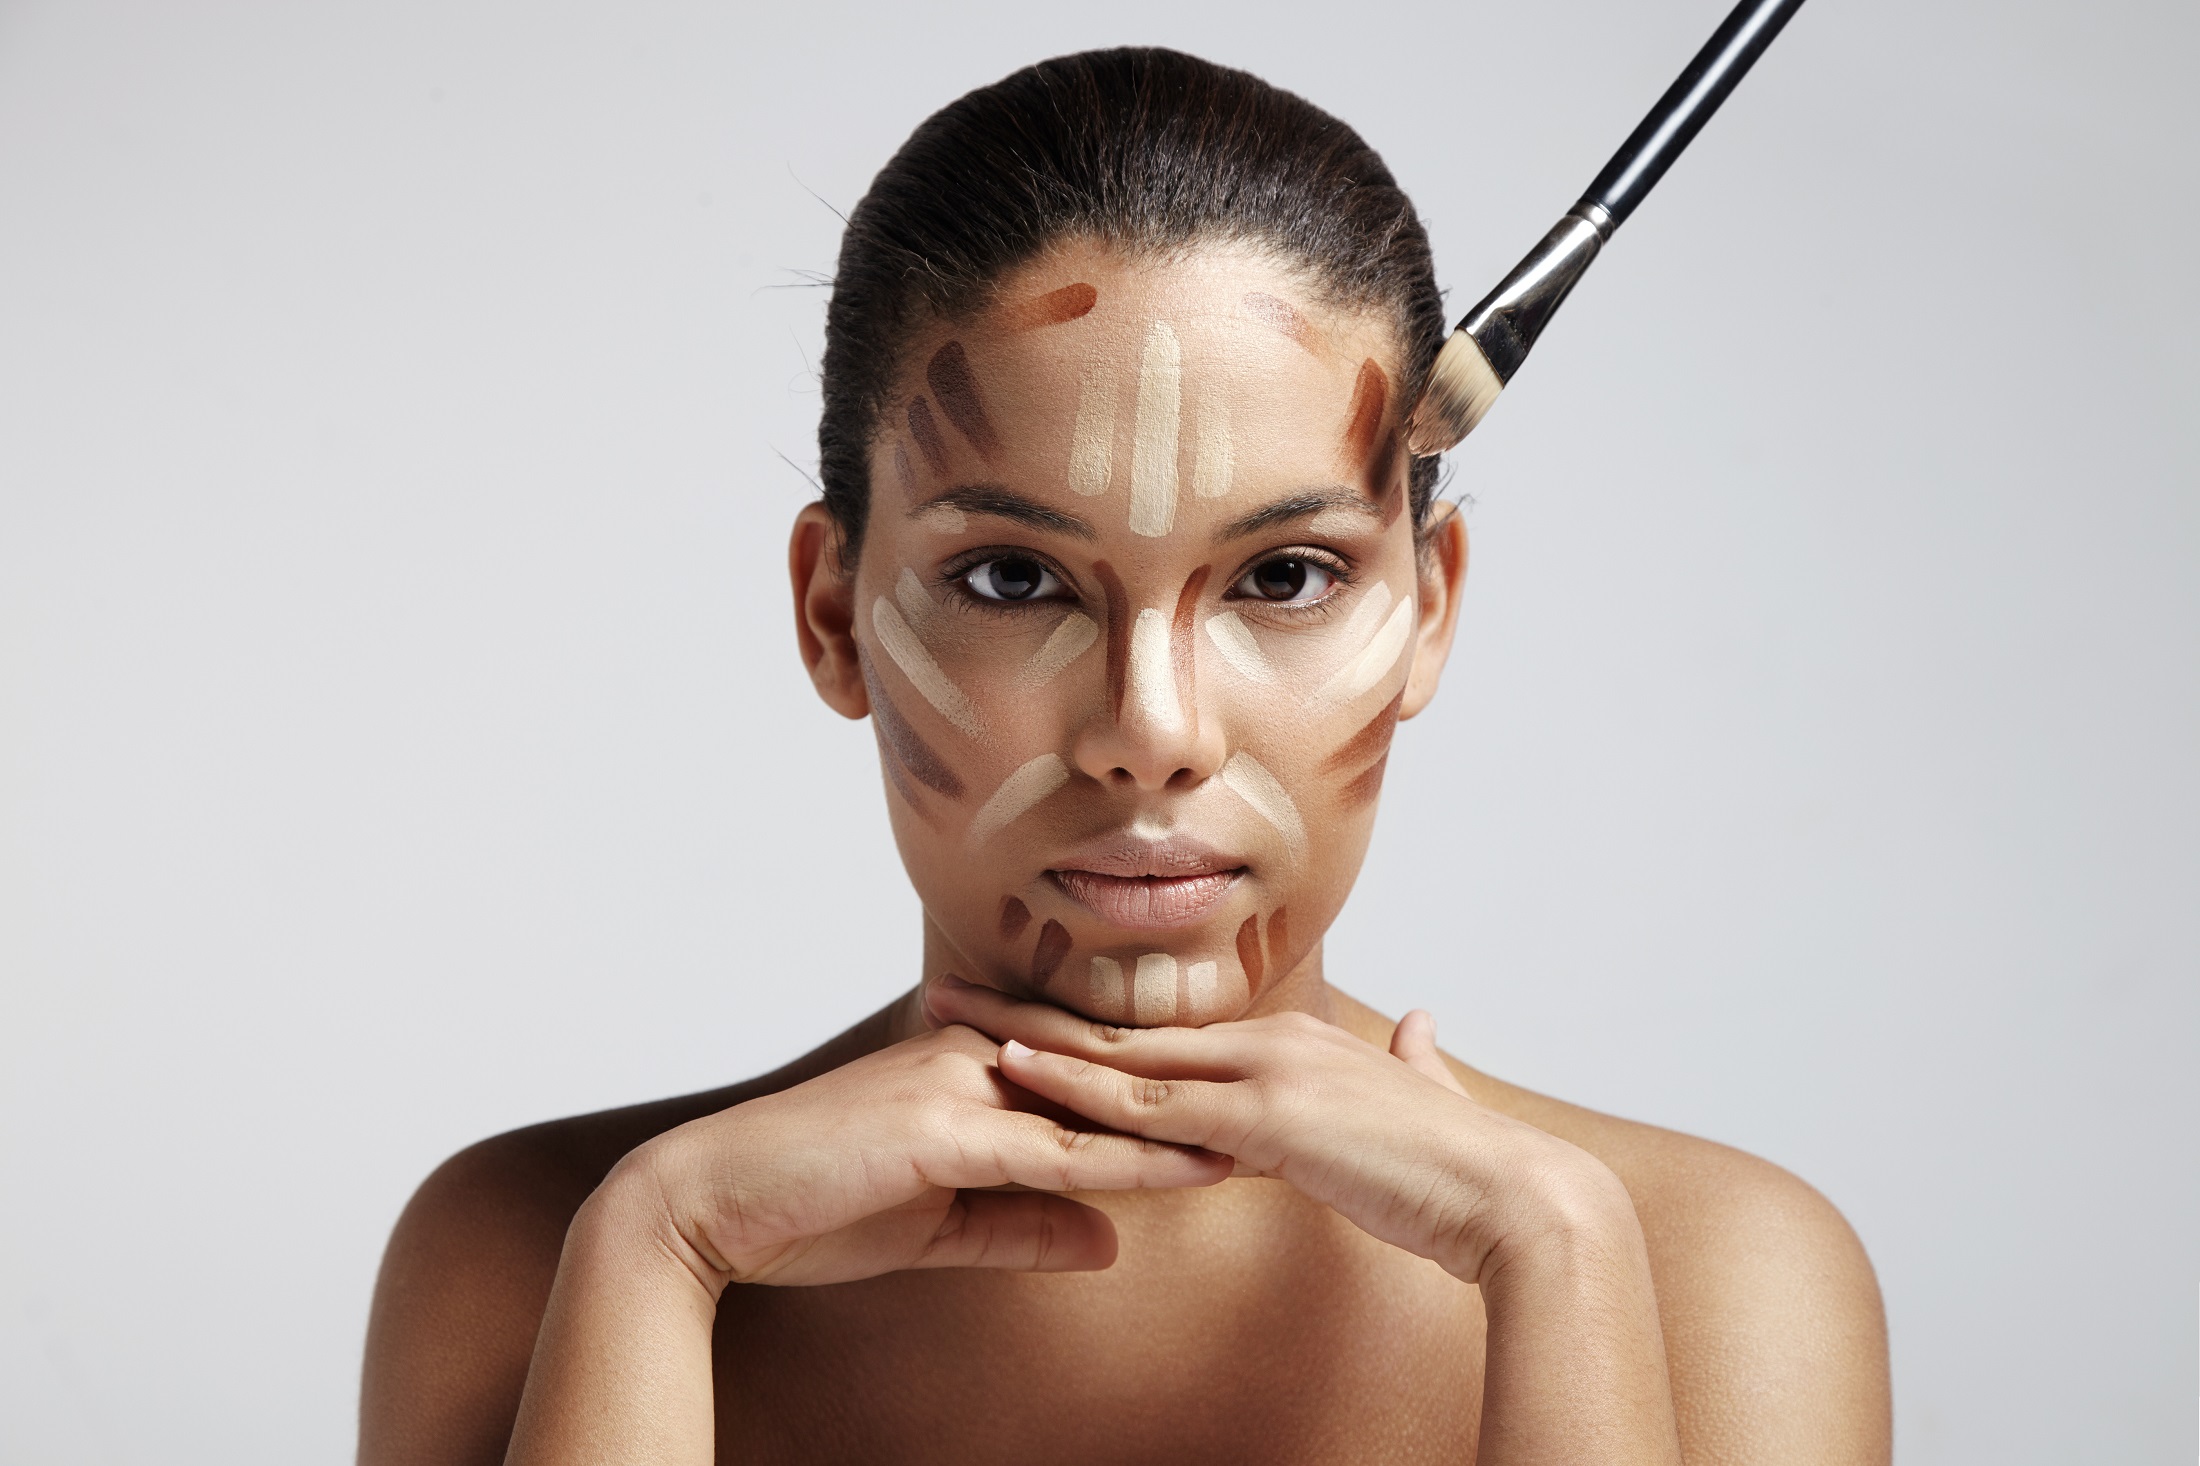 This method of face contouring has become a real hit online! Check out how it works